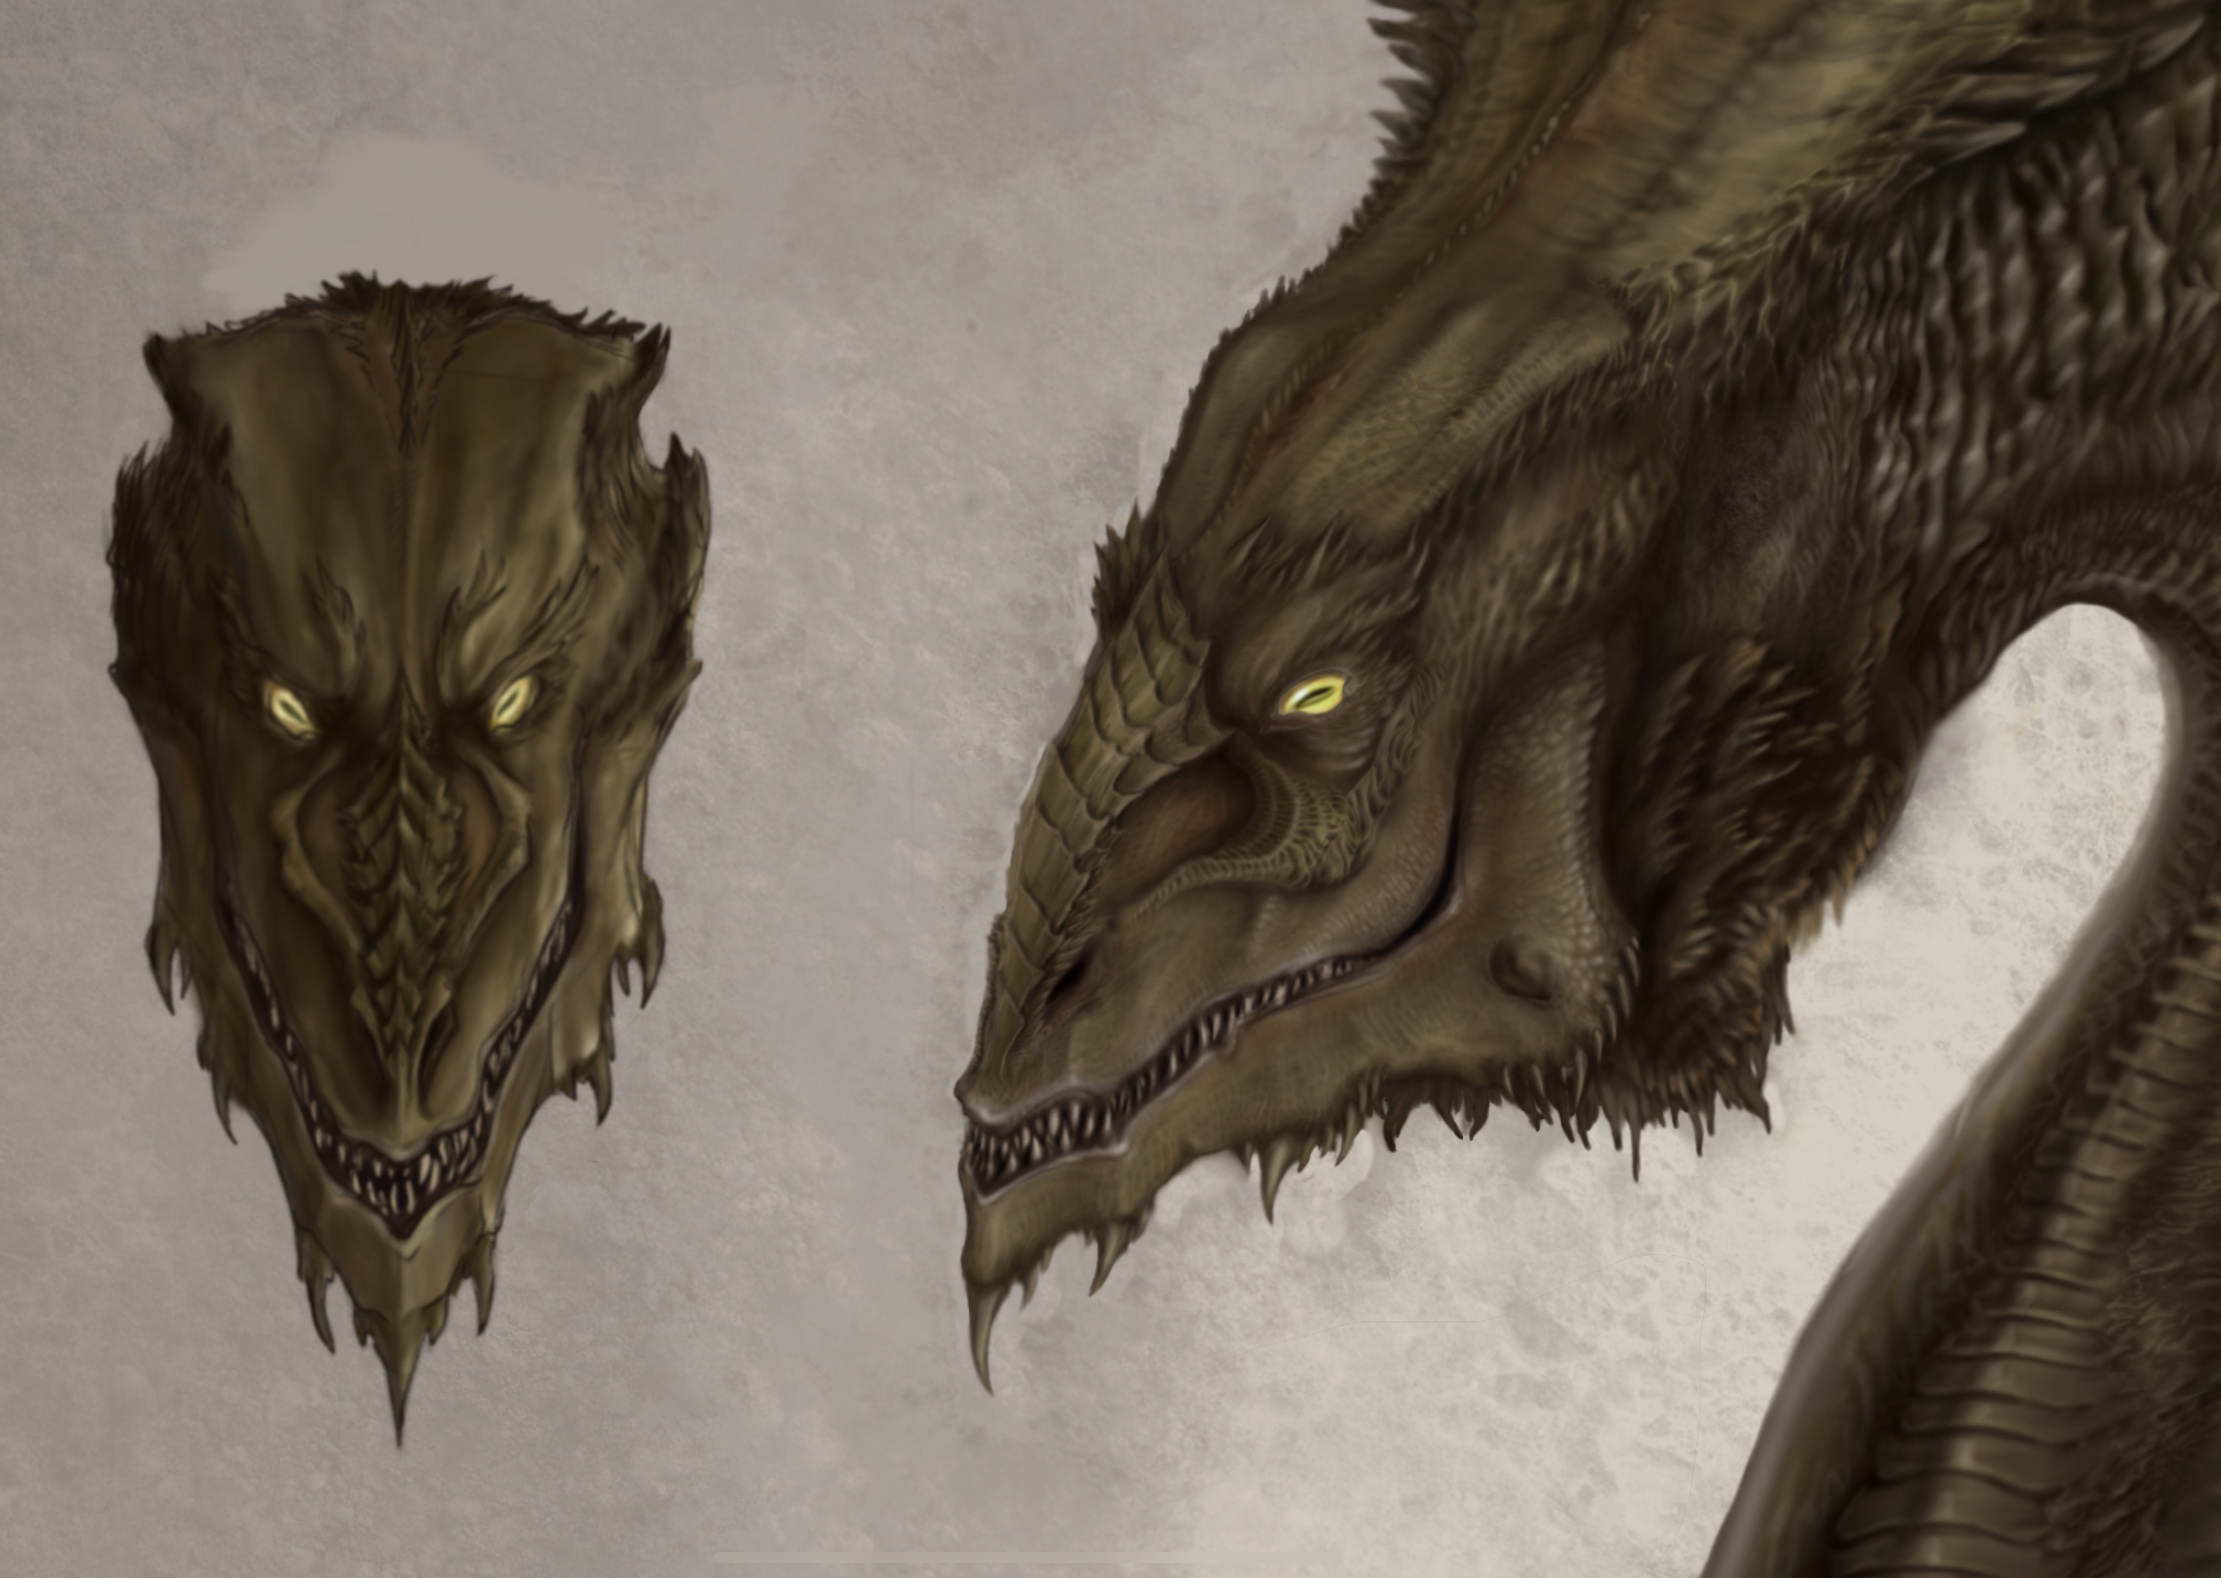 Glaurung Father of Dragons by TheWatcherofWorlds on DeviantArt